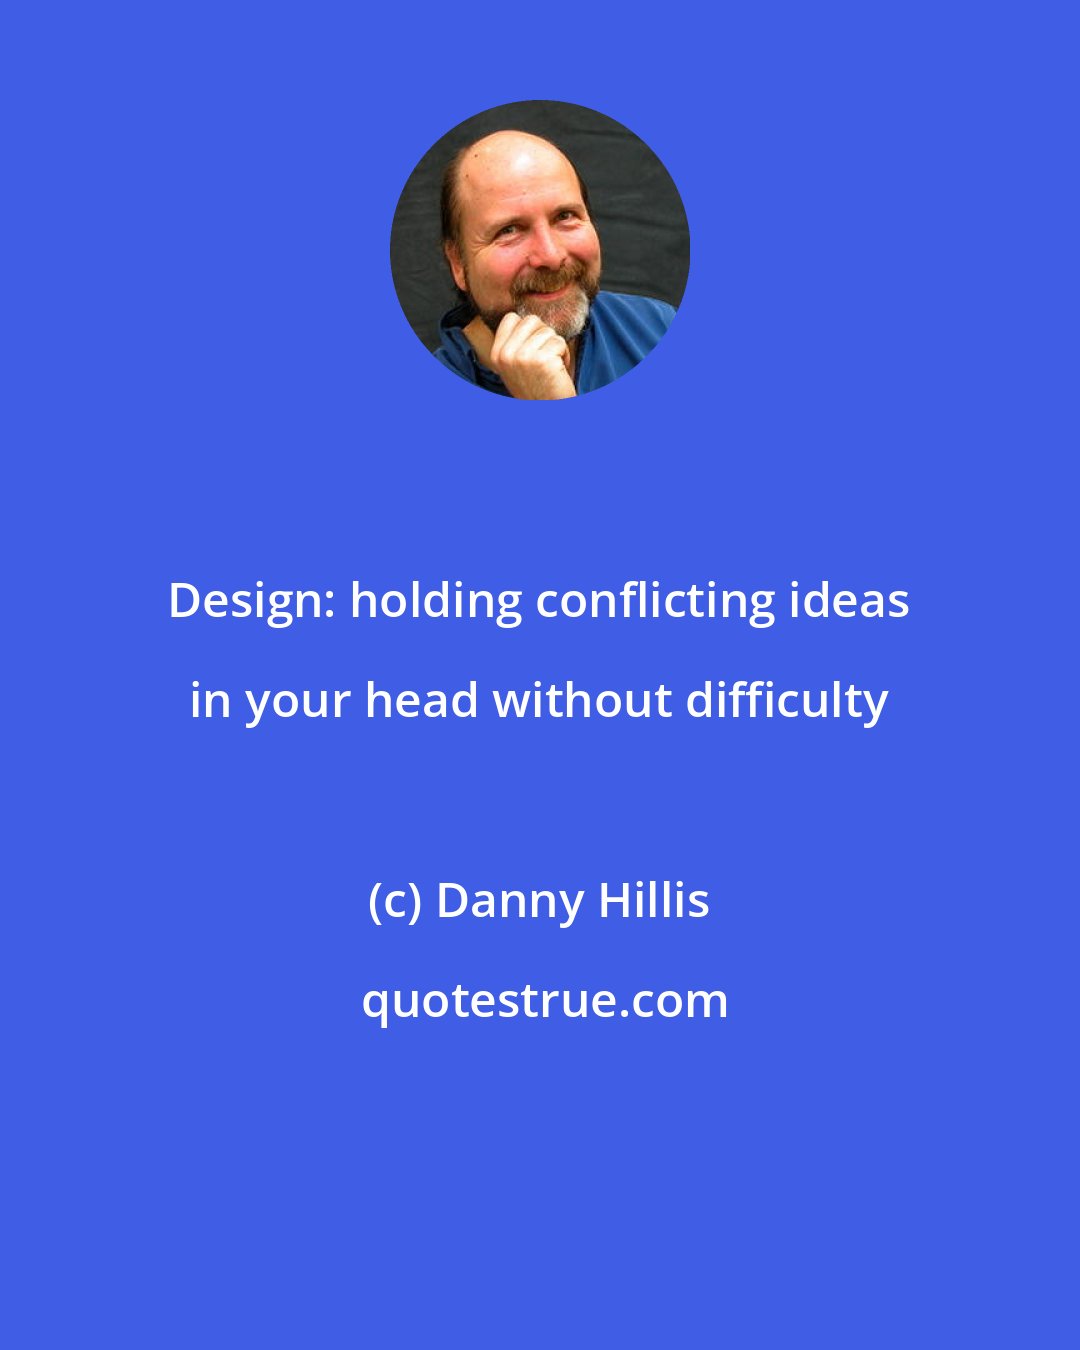 Danny Hillis: Design: holding conflicting ideas in your head without difficulty